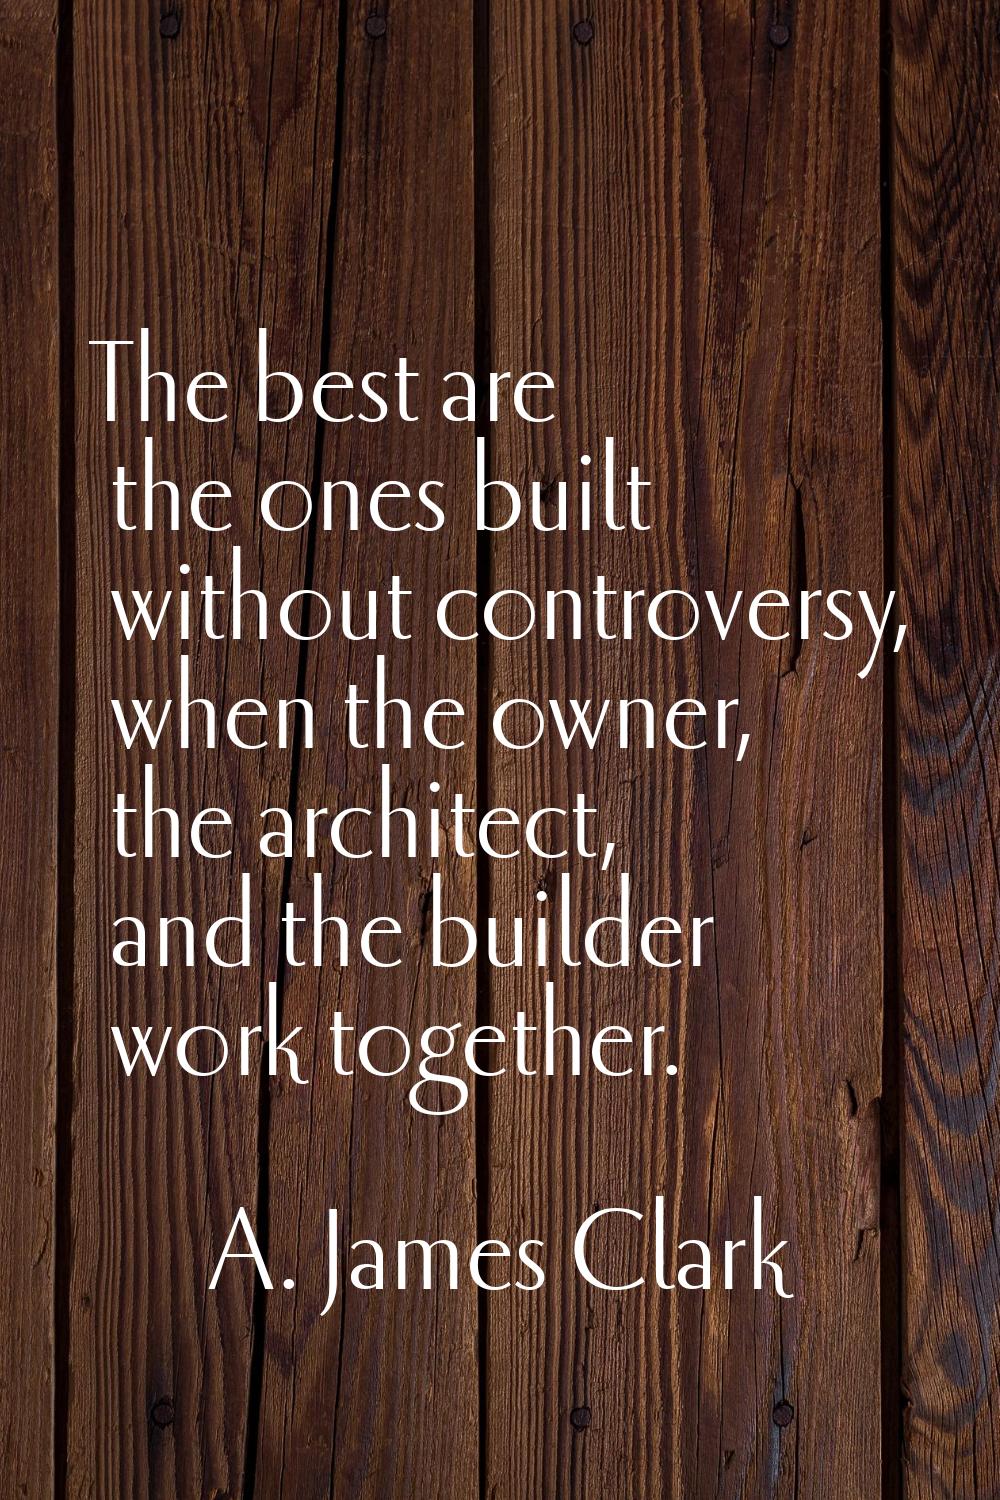 The best are the ones built without controversy, when the owner, the architect, and the builder wor